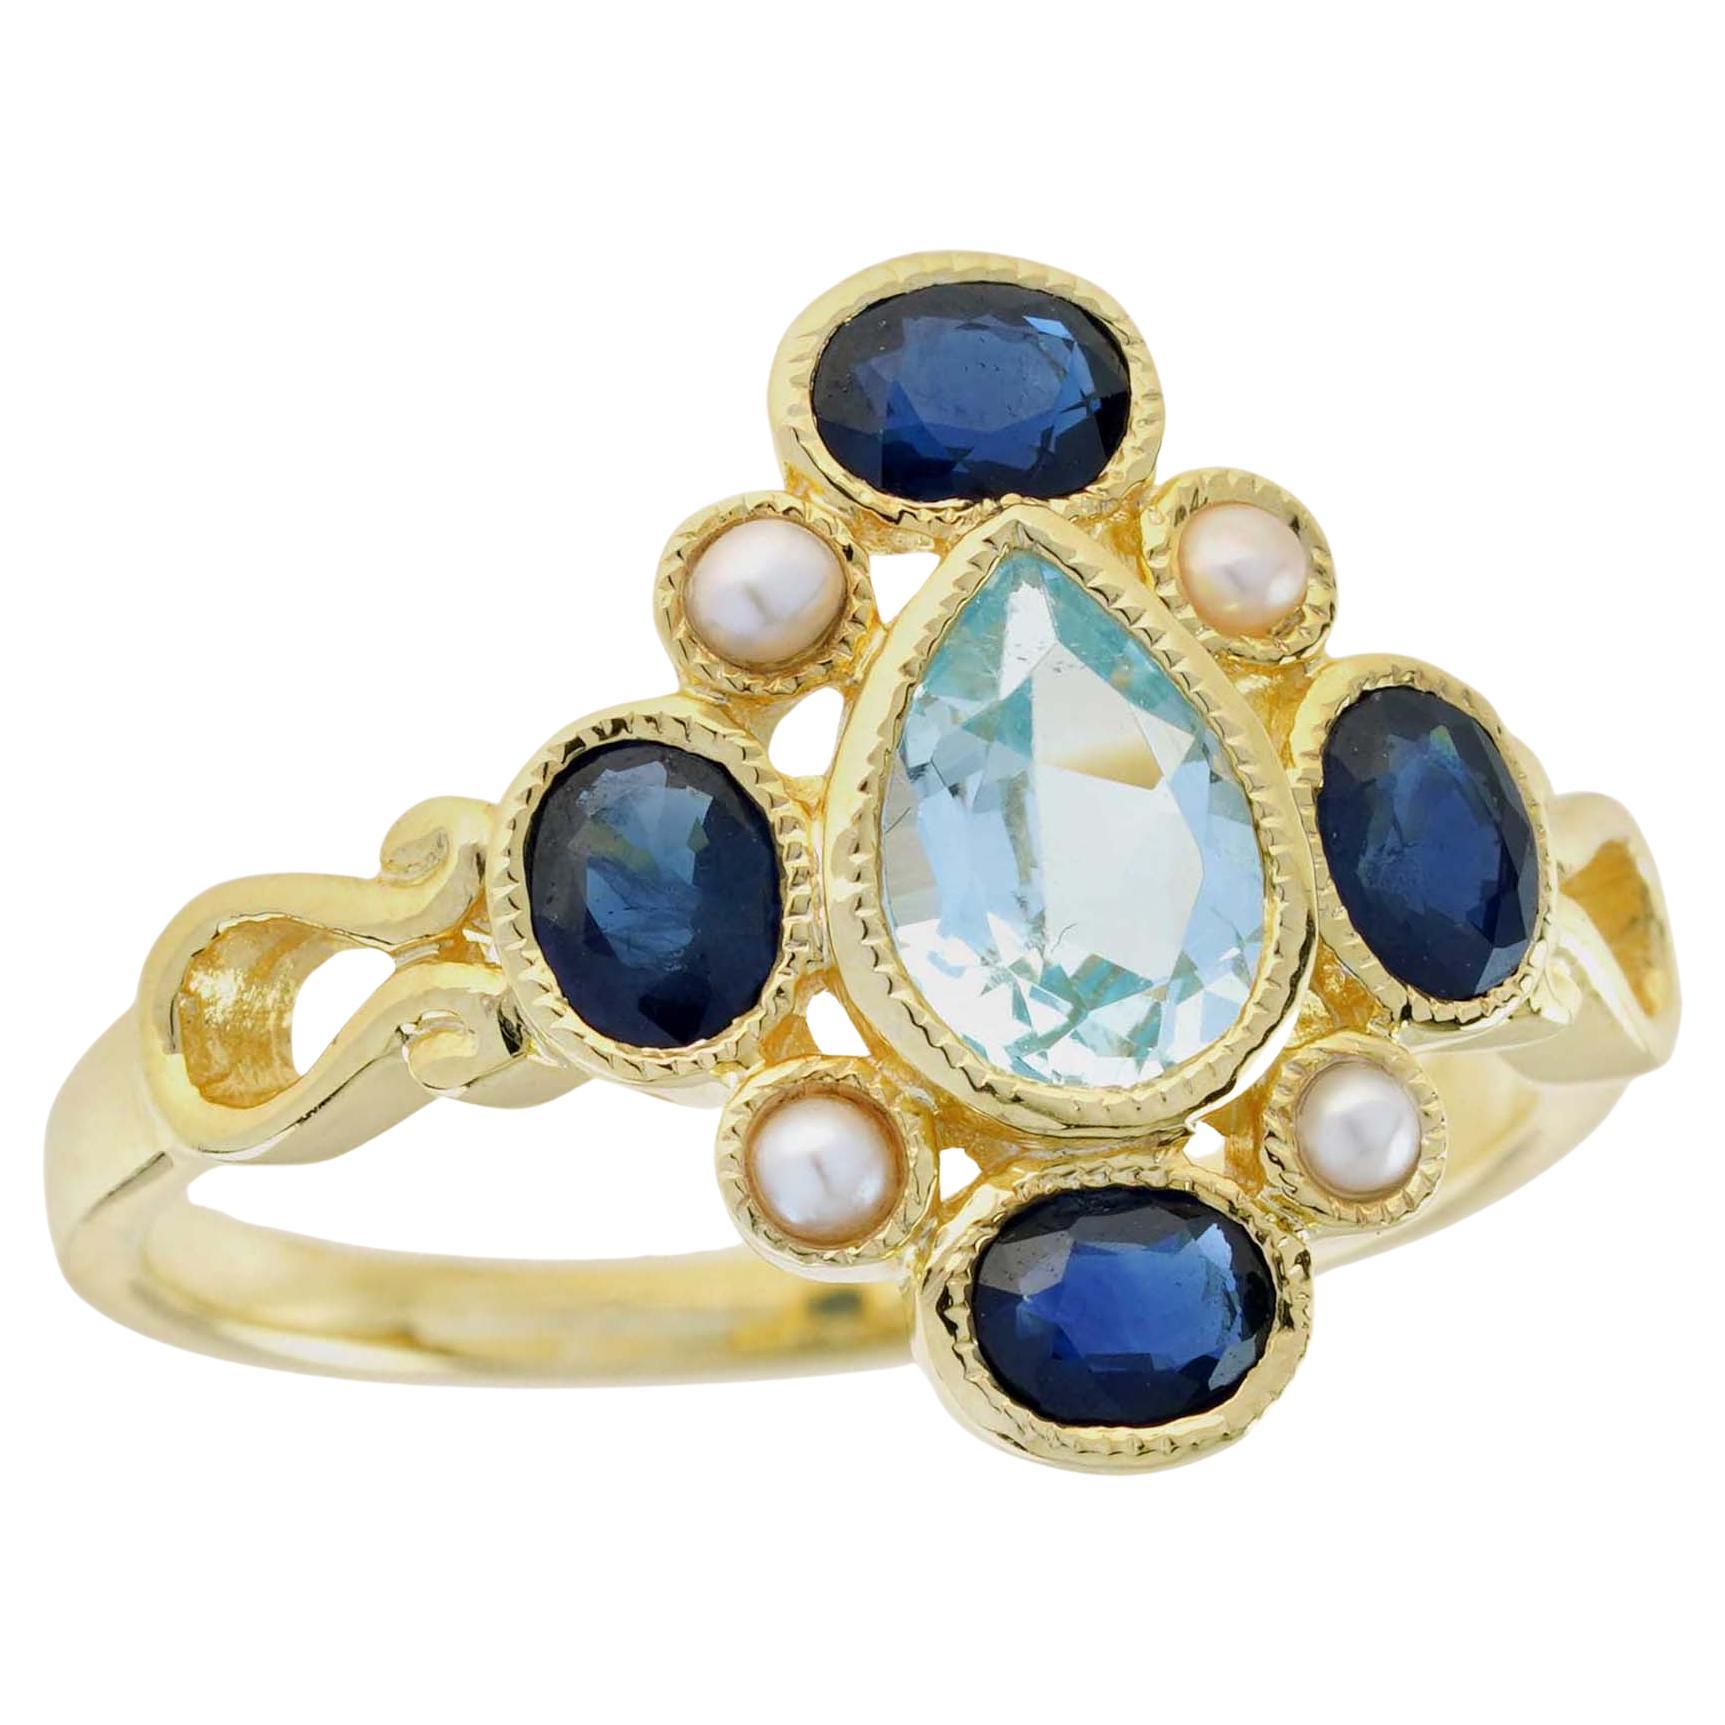 For Sale:  Natural Blue Sapphire Blue Topaz Pearl Vintage Style Cluster Ring in 9K Gold